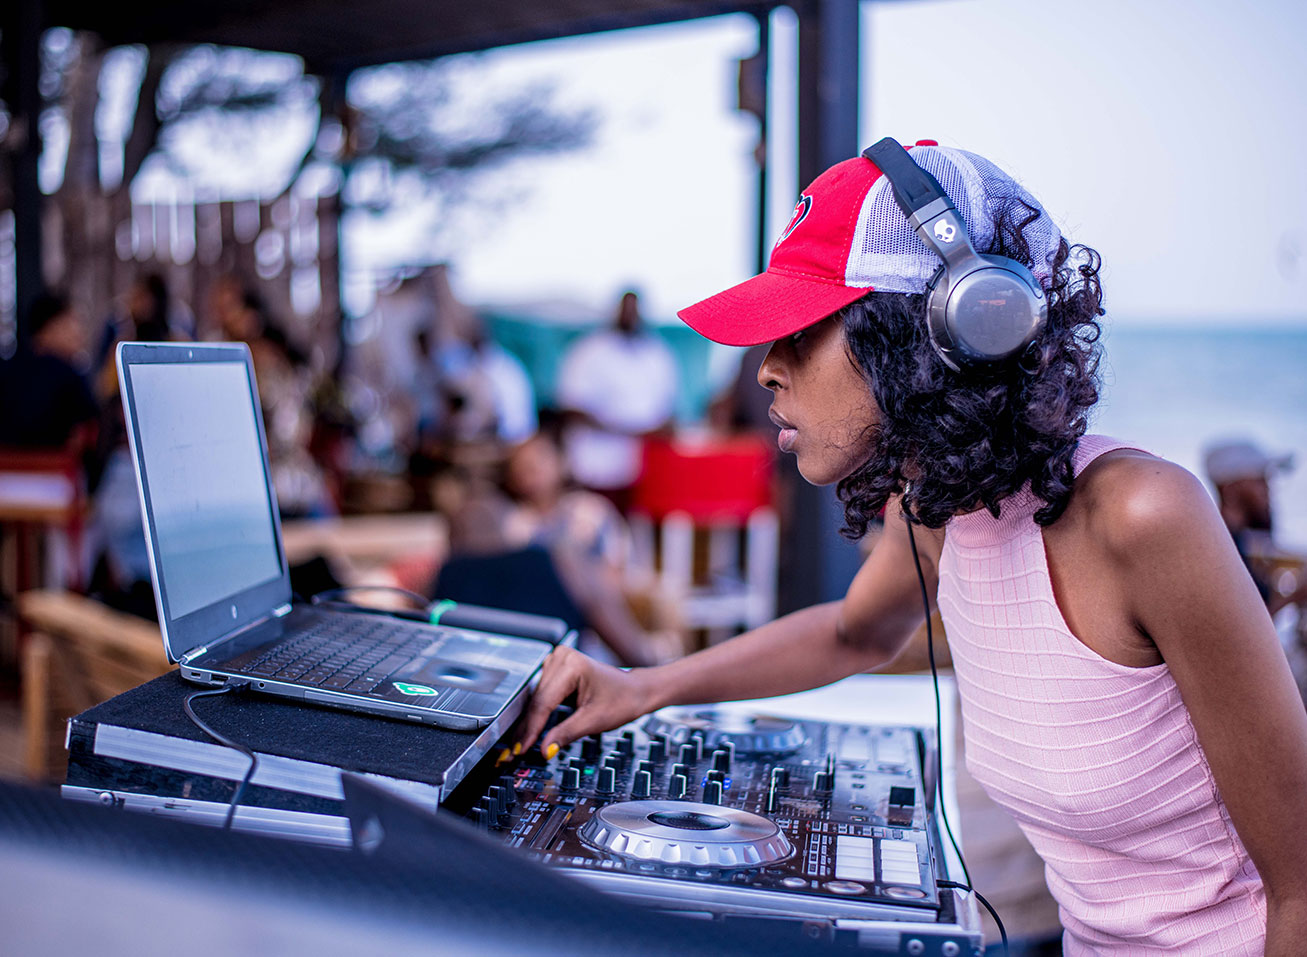 Live DJ and entertainment at The Thailand International Boat Show in Phuket